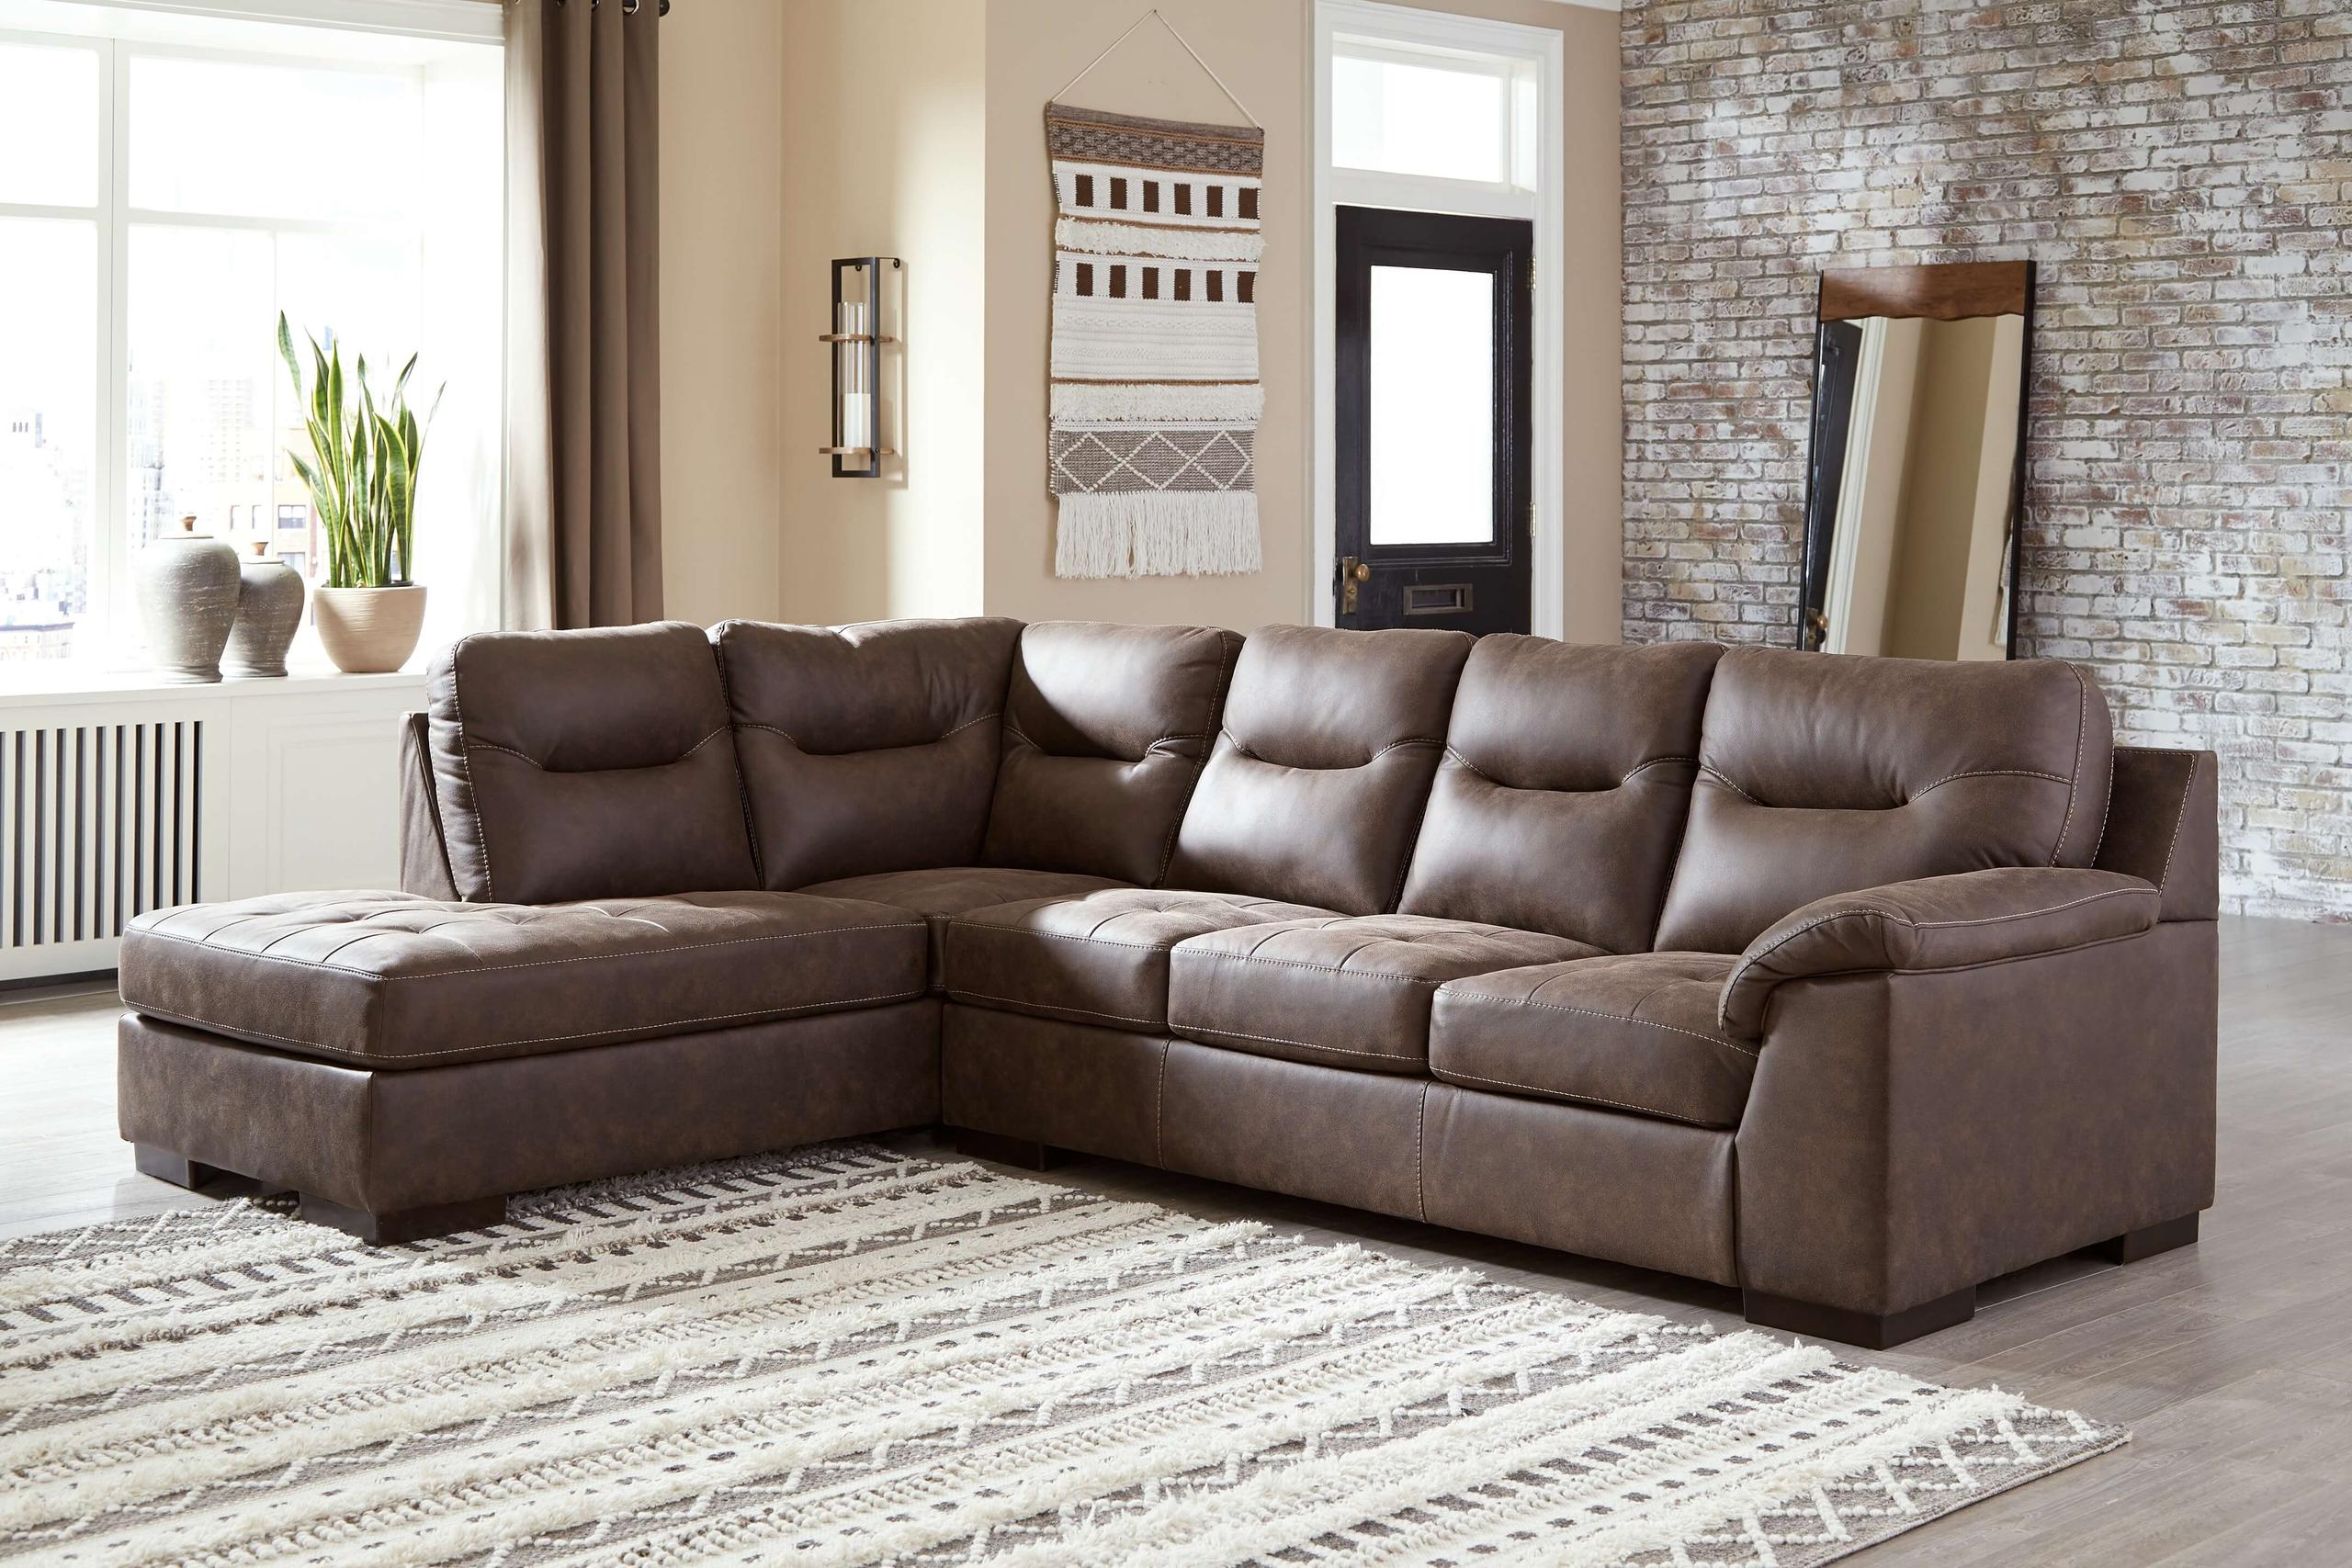 ASHLEY FURNITURE 62002S1 Maderla 2-piece Sectional With Chaise